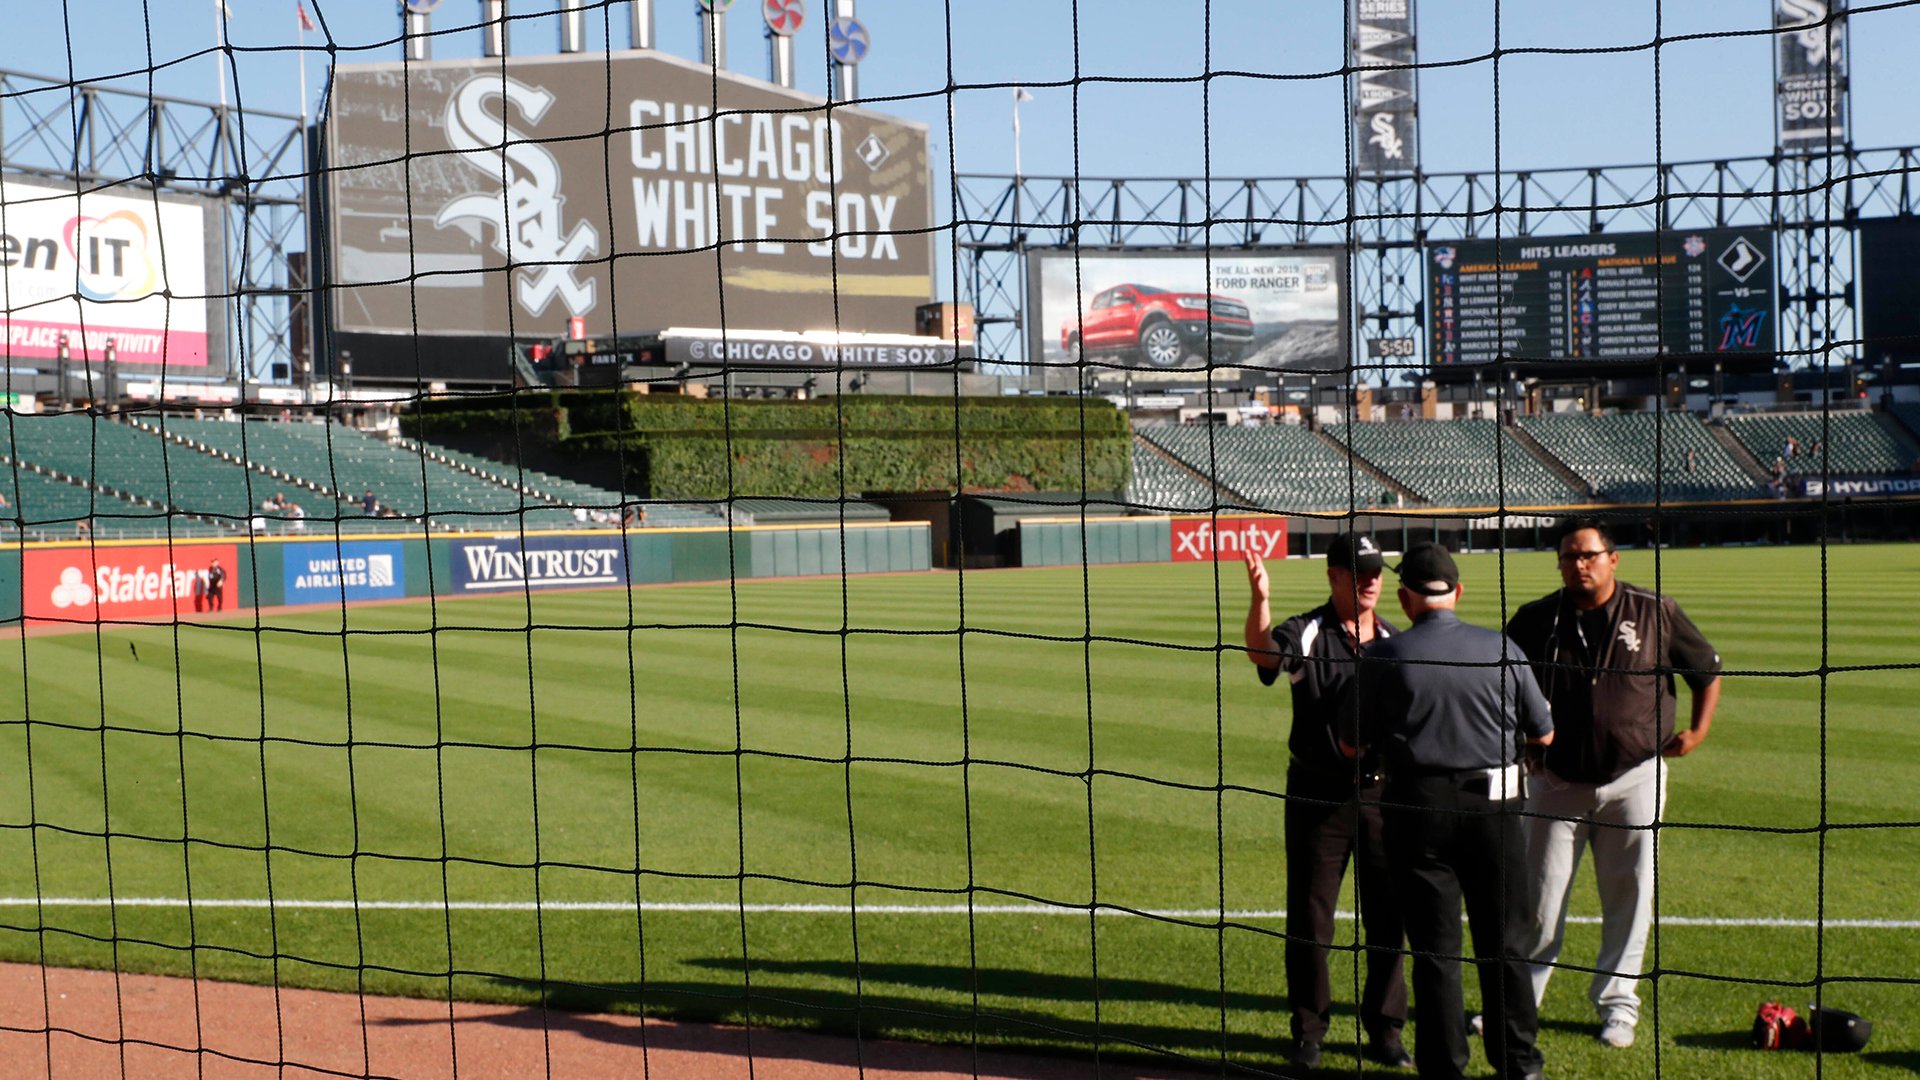 Behind the Ballpark, by Chicago White Sox